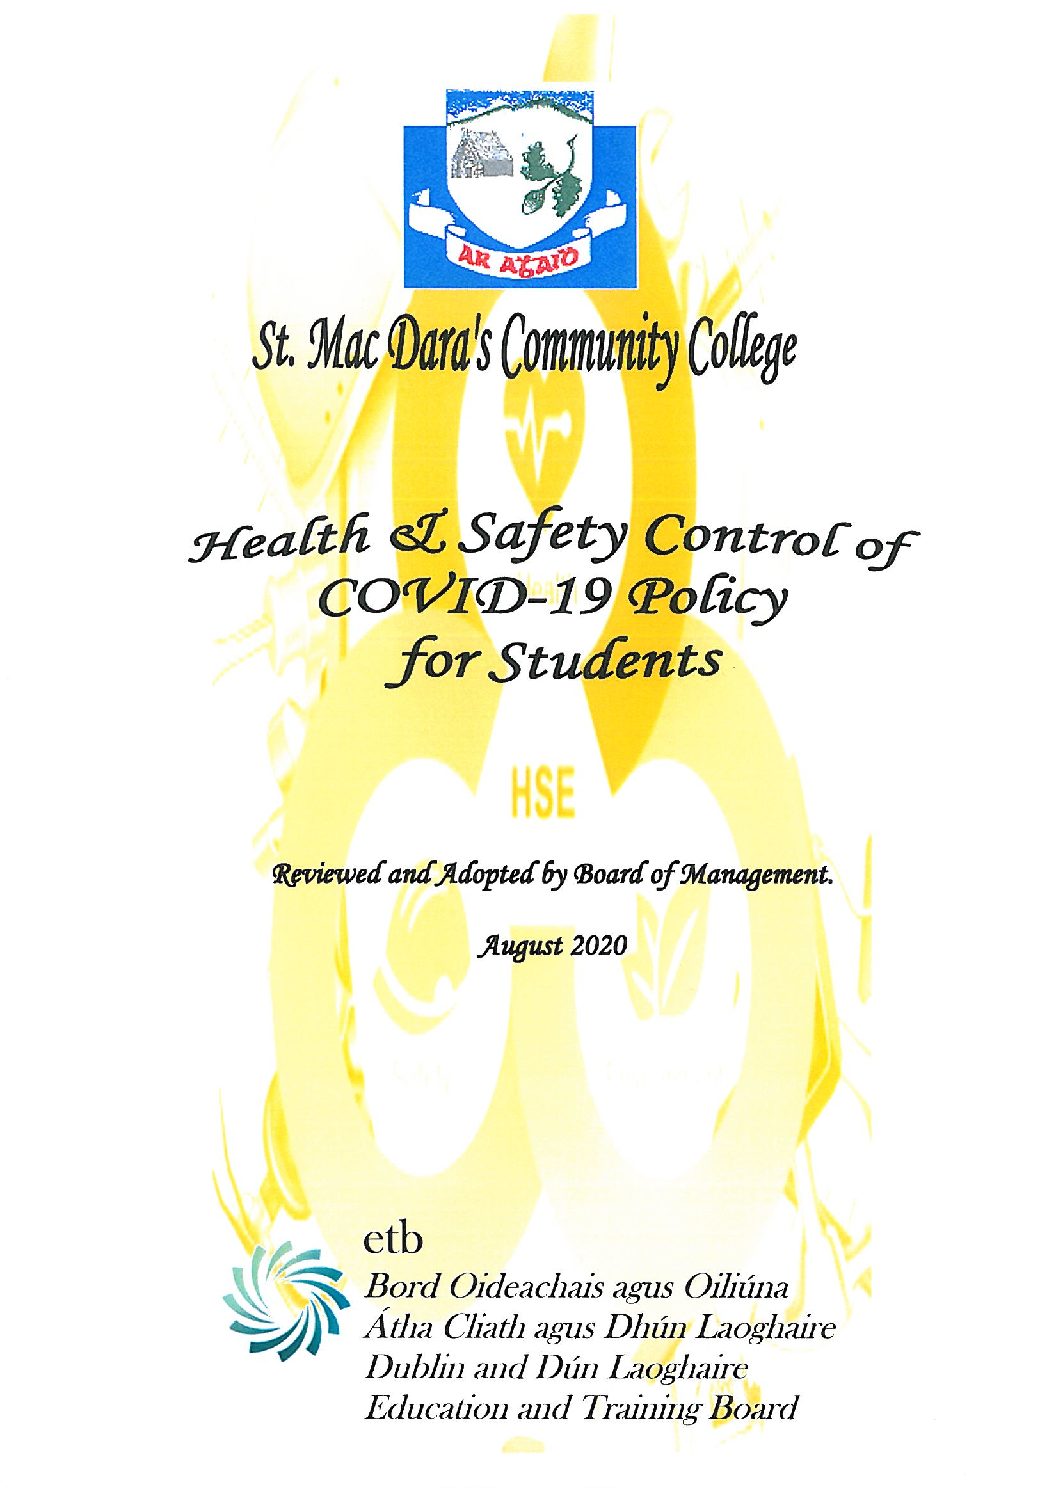 Health & Safety Control of Covid-19 Policy for Students